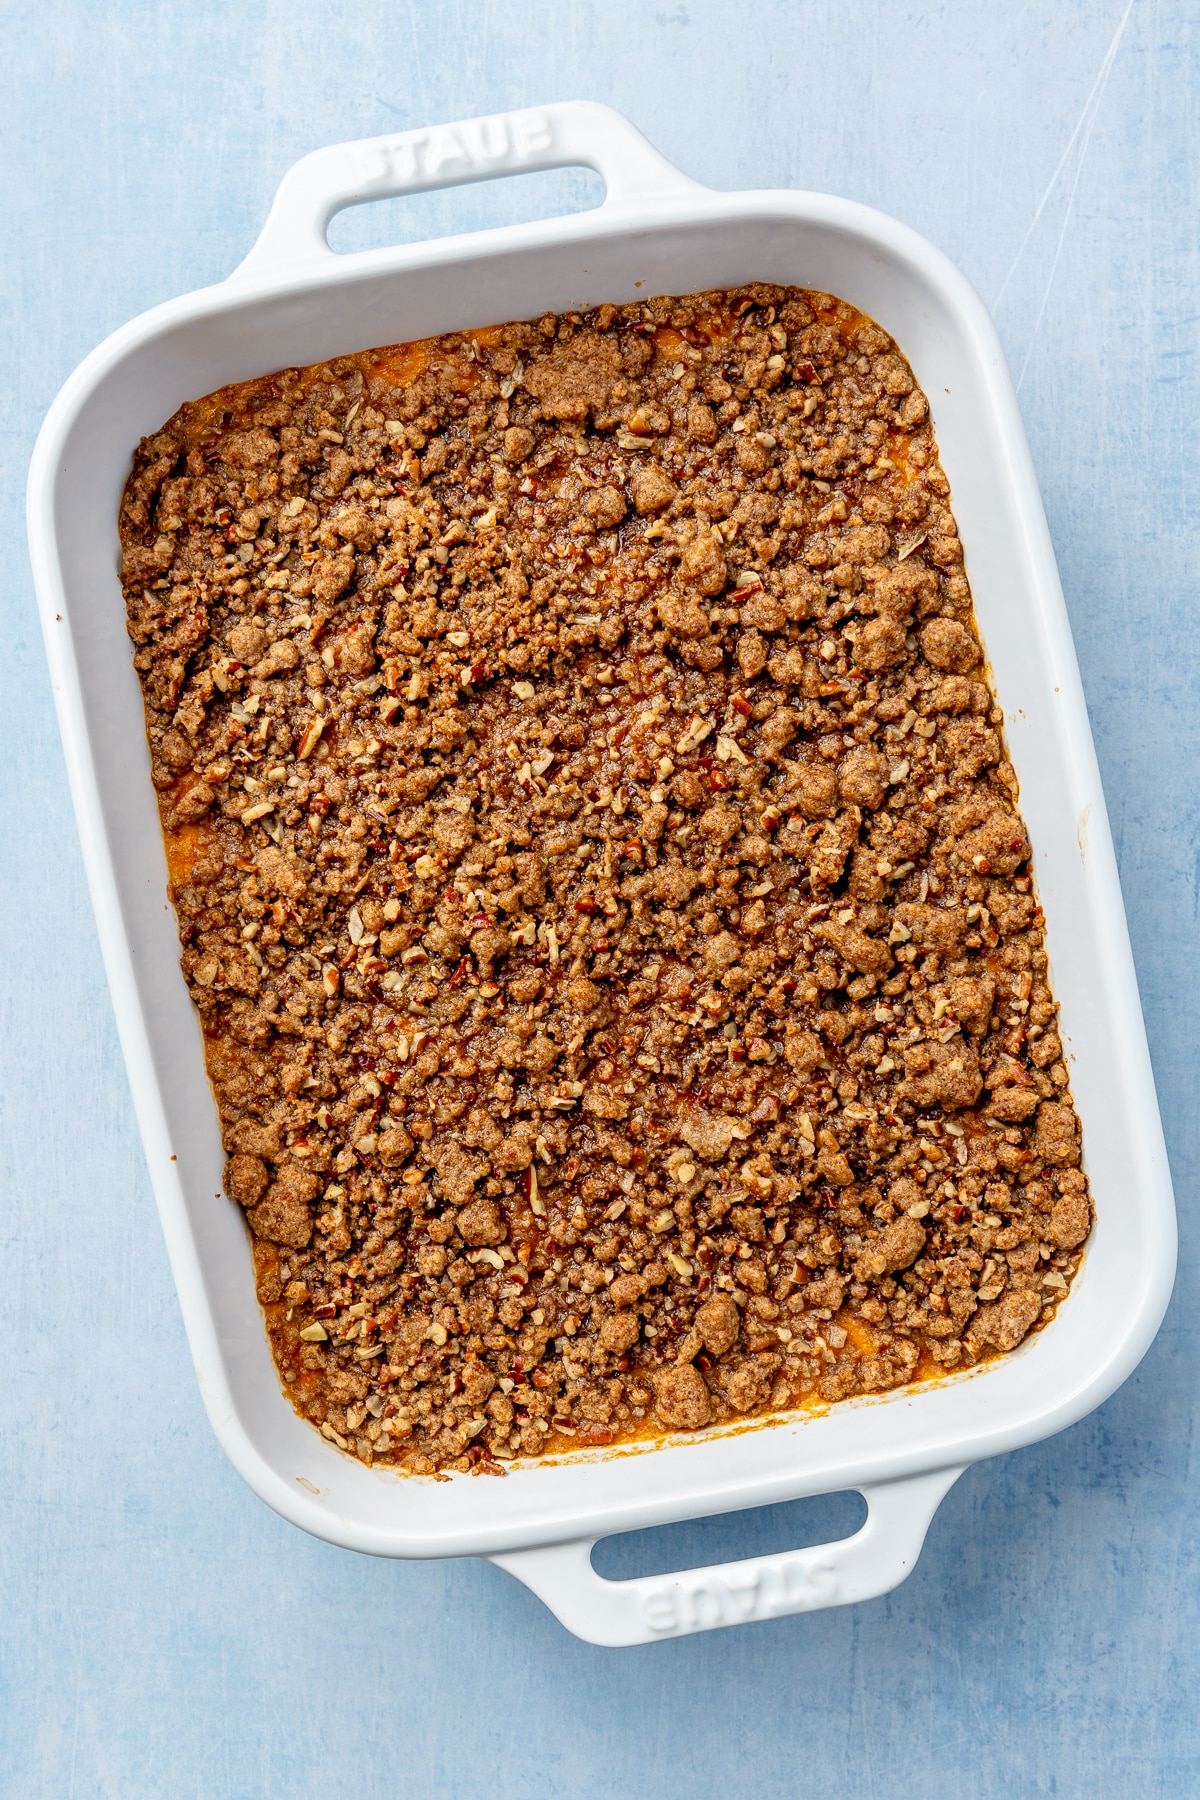 A baked sweet potato mixture, topped with a brown crumble sits, baked, in a white baking dish.